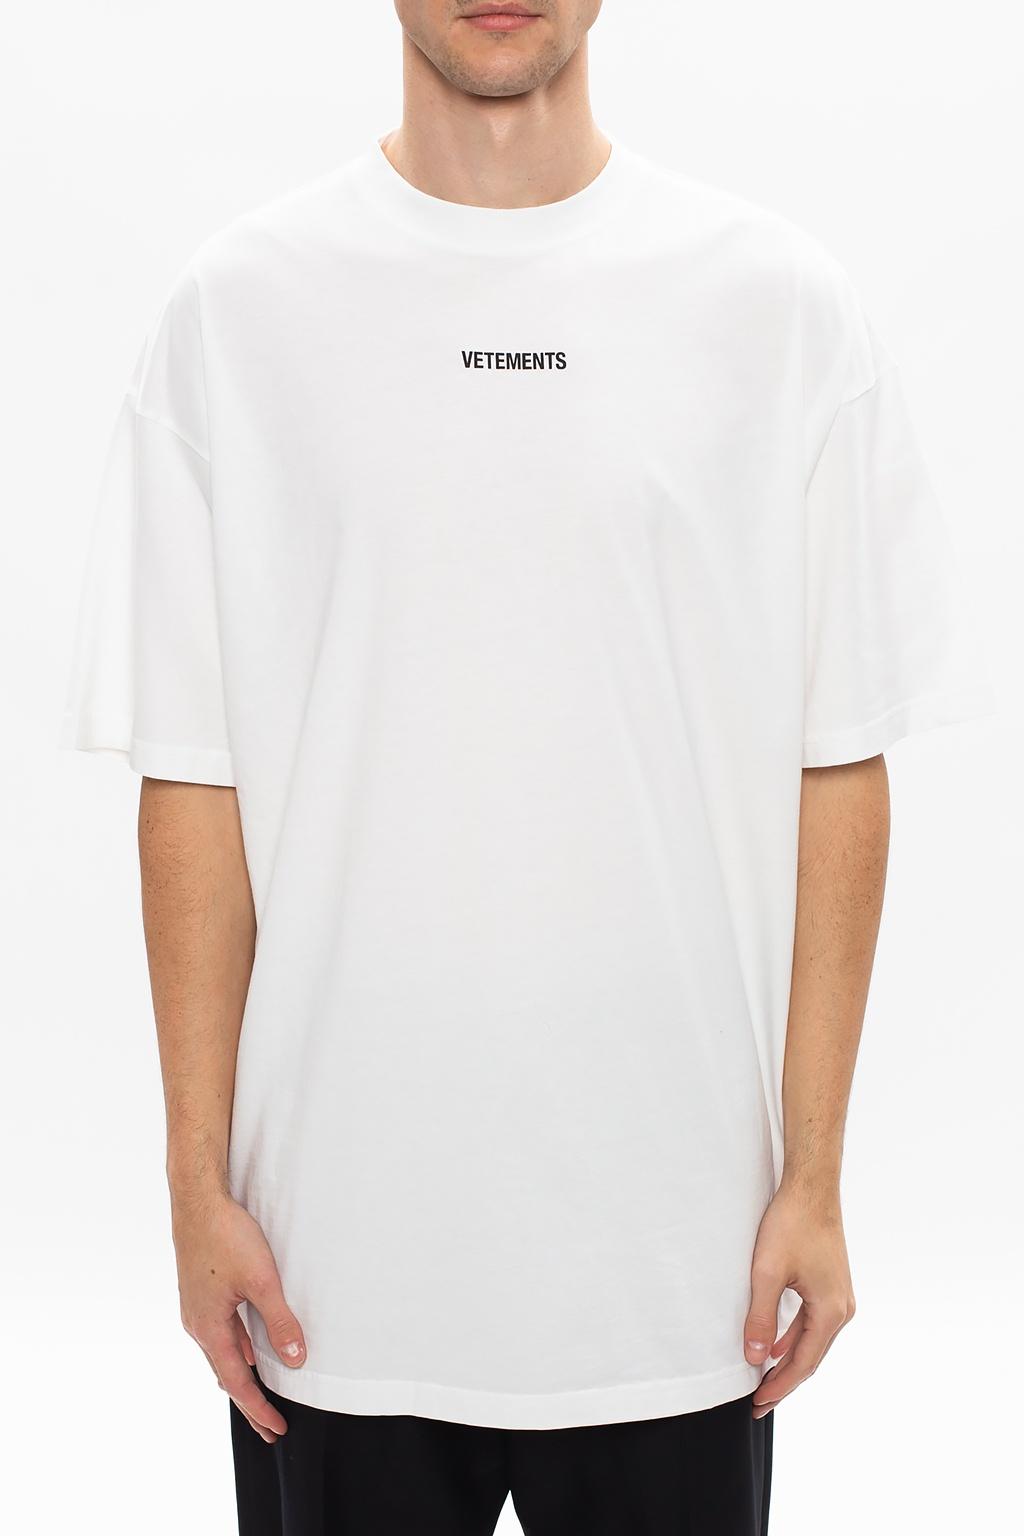 Vetements Cotton T-shirt With Logo in White for Men | Lyst